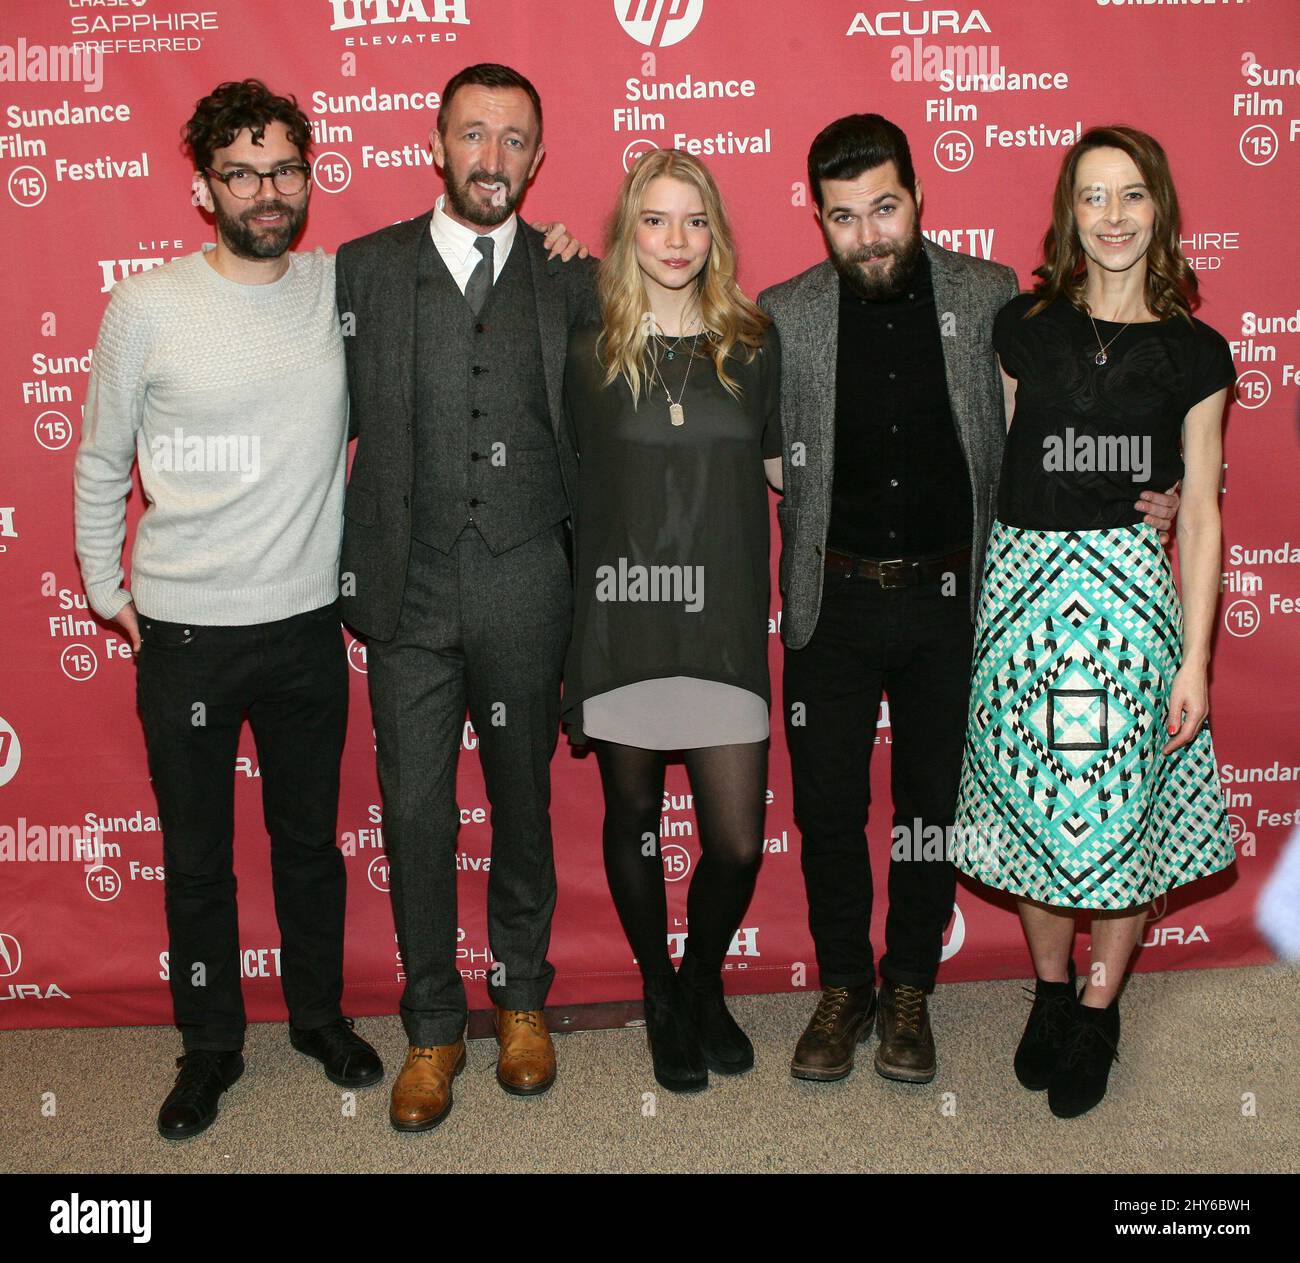 Jay Van Hoy, Ralph Ineson, Anya Taylor Joy, Robert Eggers and Kate Dickie attending the premiere of The Witch at the 2015 Sundance Film Festival in Park City, Utah. Stock Photo